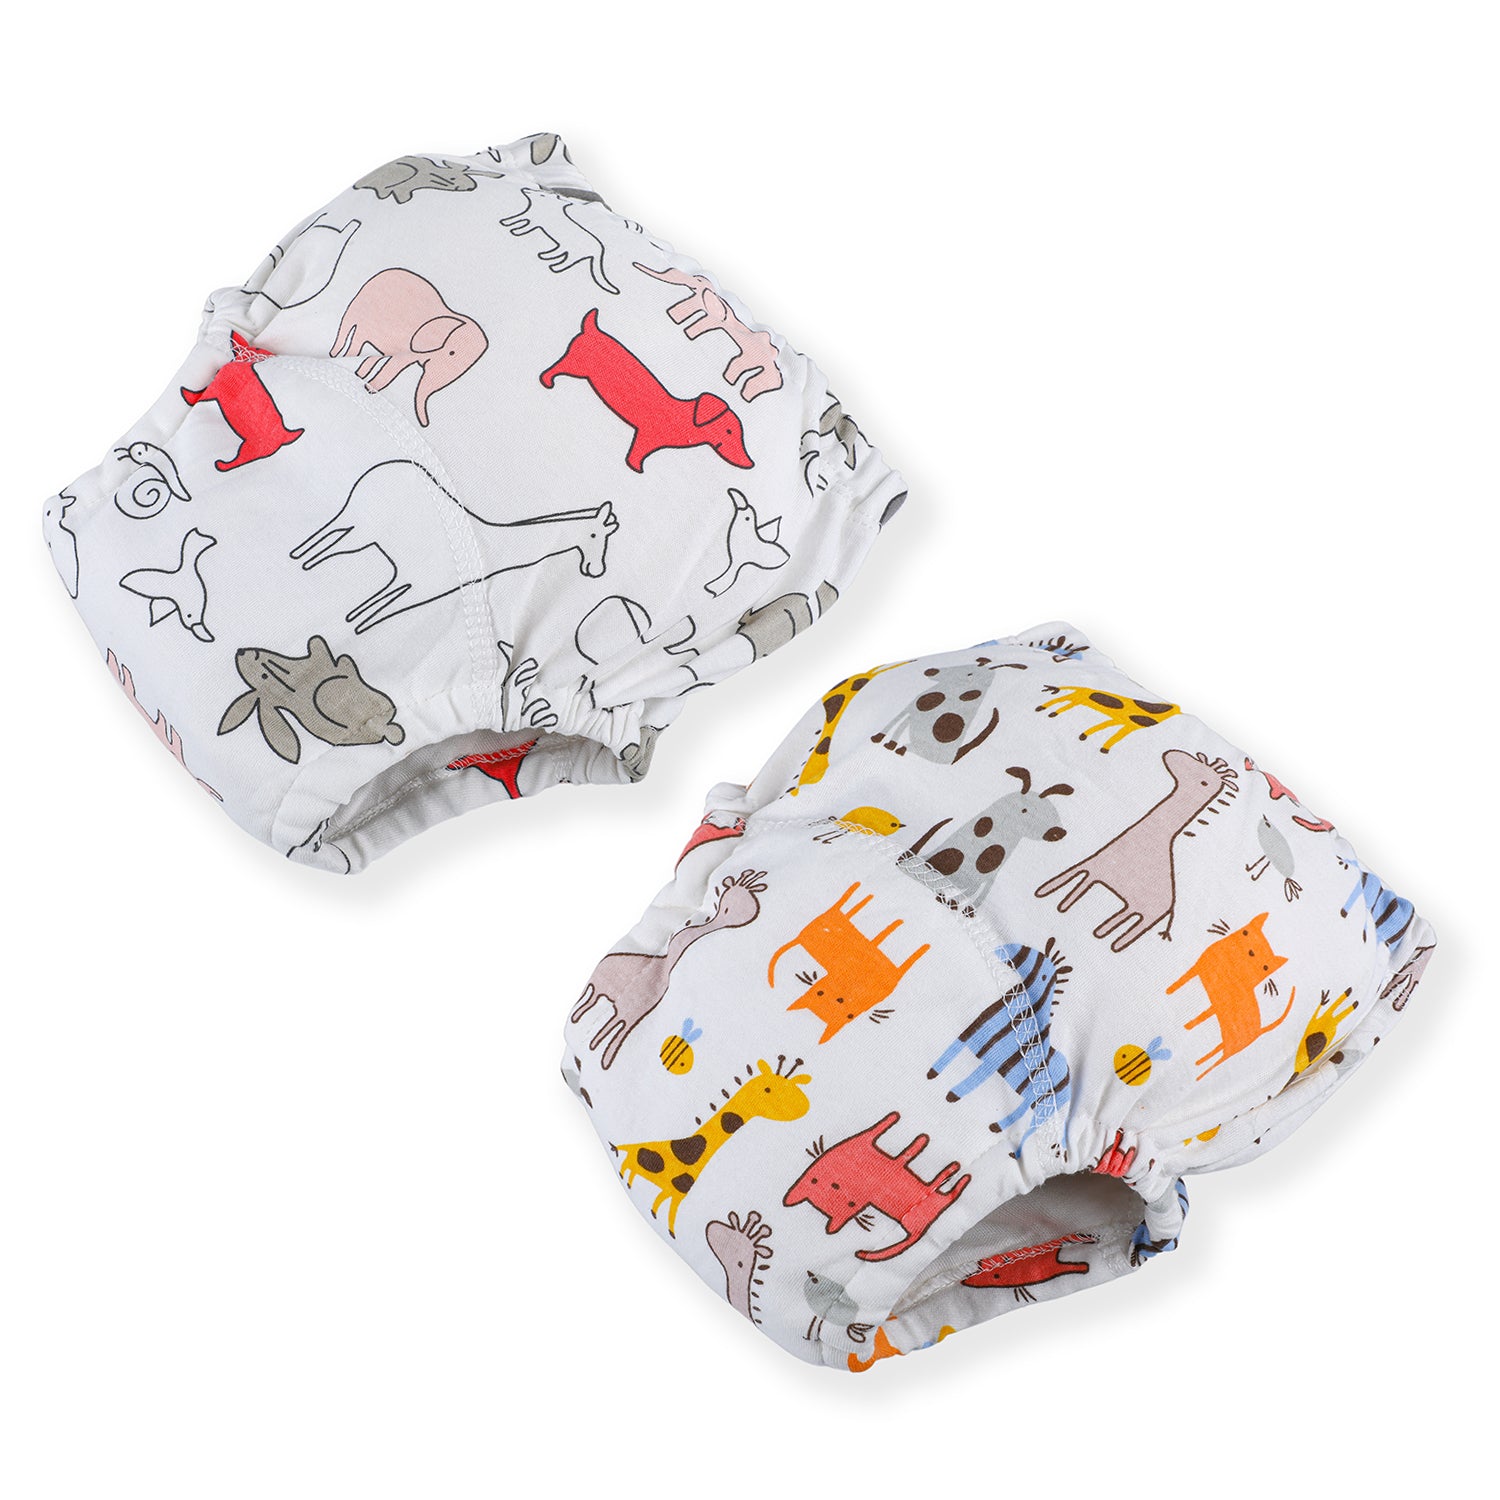 Fun In The Zoo Reusable Cloth Training Pants Clothing Accessory Diaper Panty 2 Pcs - Multicolour - Baby Moo